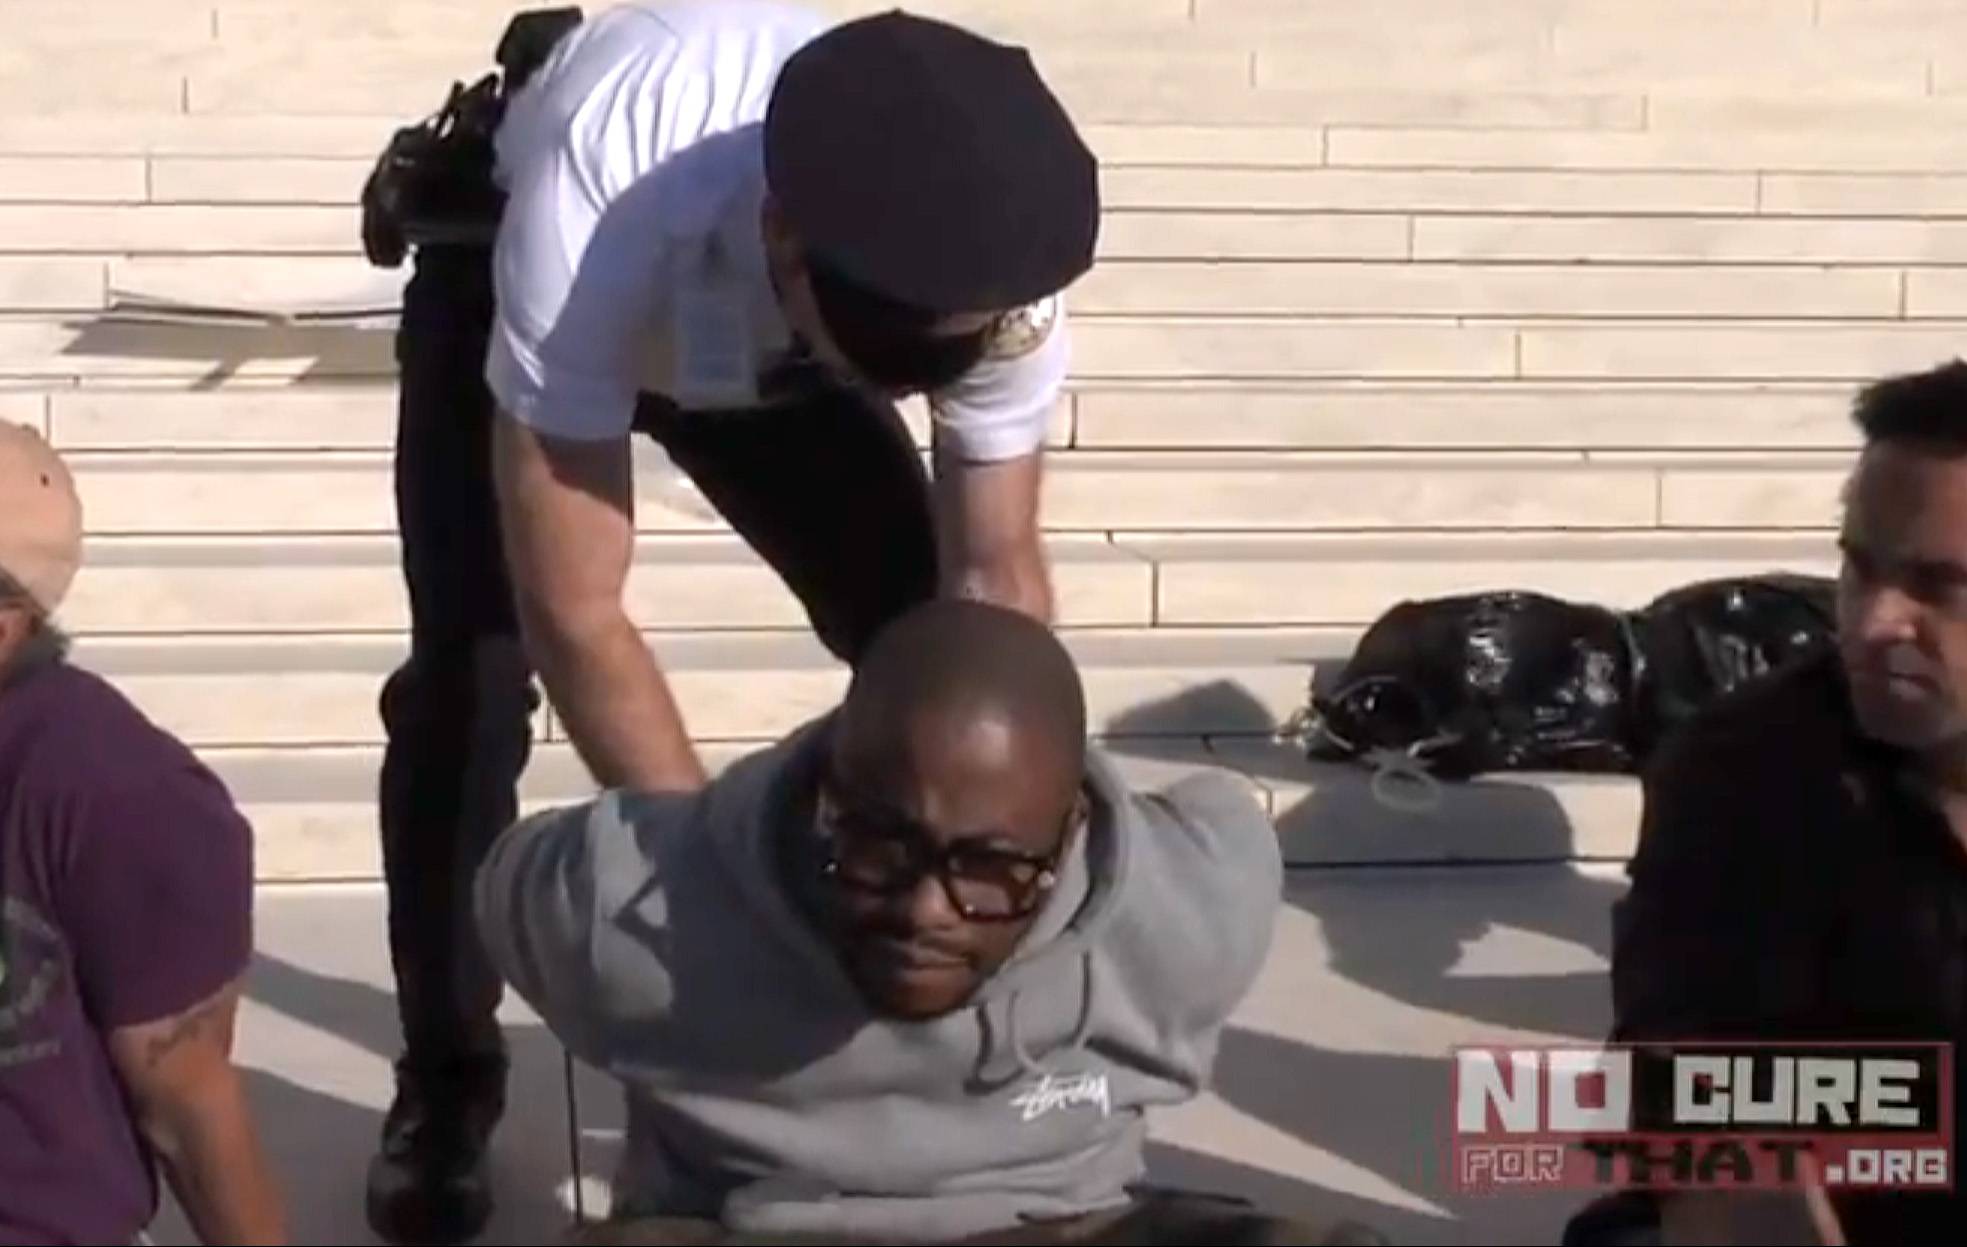 Raheem Devaughn - Washington, D.C.’s homegrown soul singer was arrested alongside Dr. Cornel West on the steps of the Supreme Court while showing his support for the cause. “The message is: Wake up. This can be you. My parents are older, so I have a mom who struggles. It gets tight at times. I have a father who has health issues and battles cancer and wonders if he can pay for his treatment,” he told BET.com. (Photo: Courtesy nocureforthat.org)